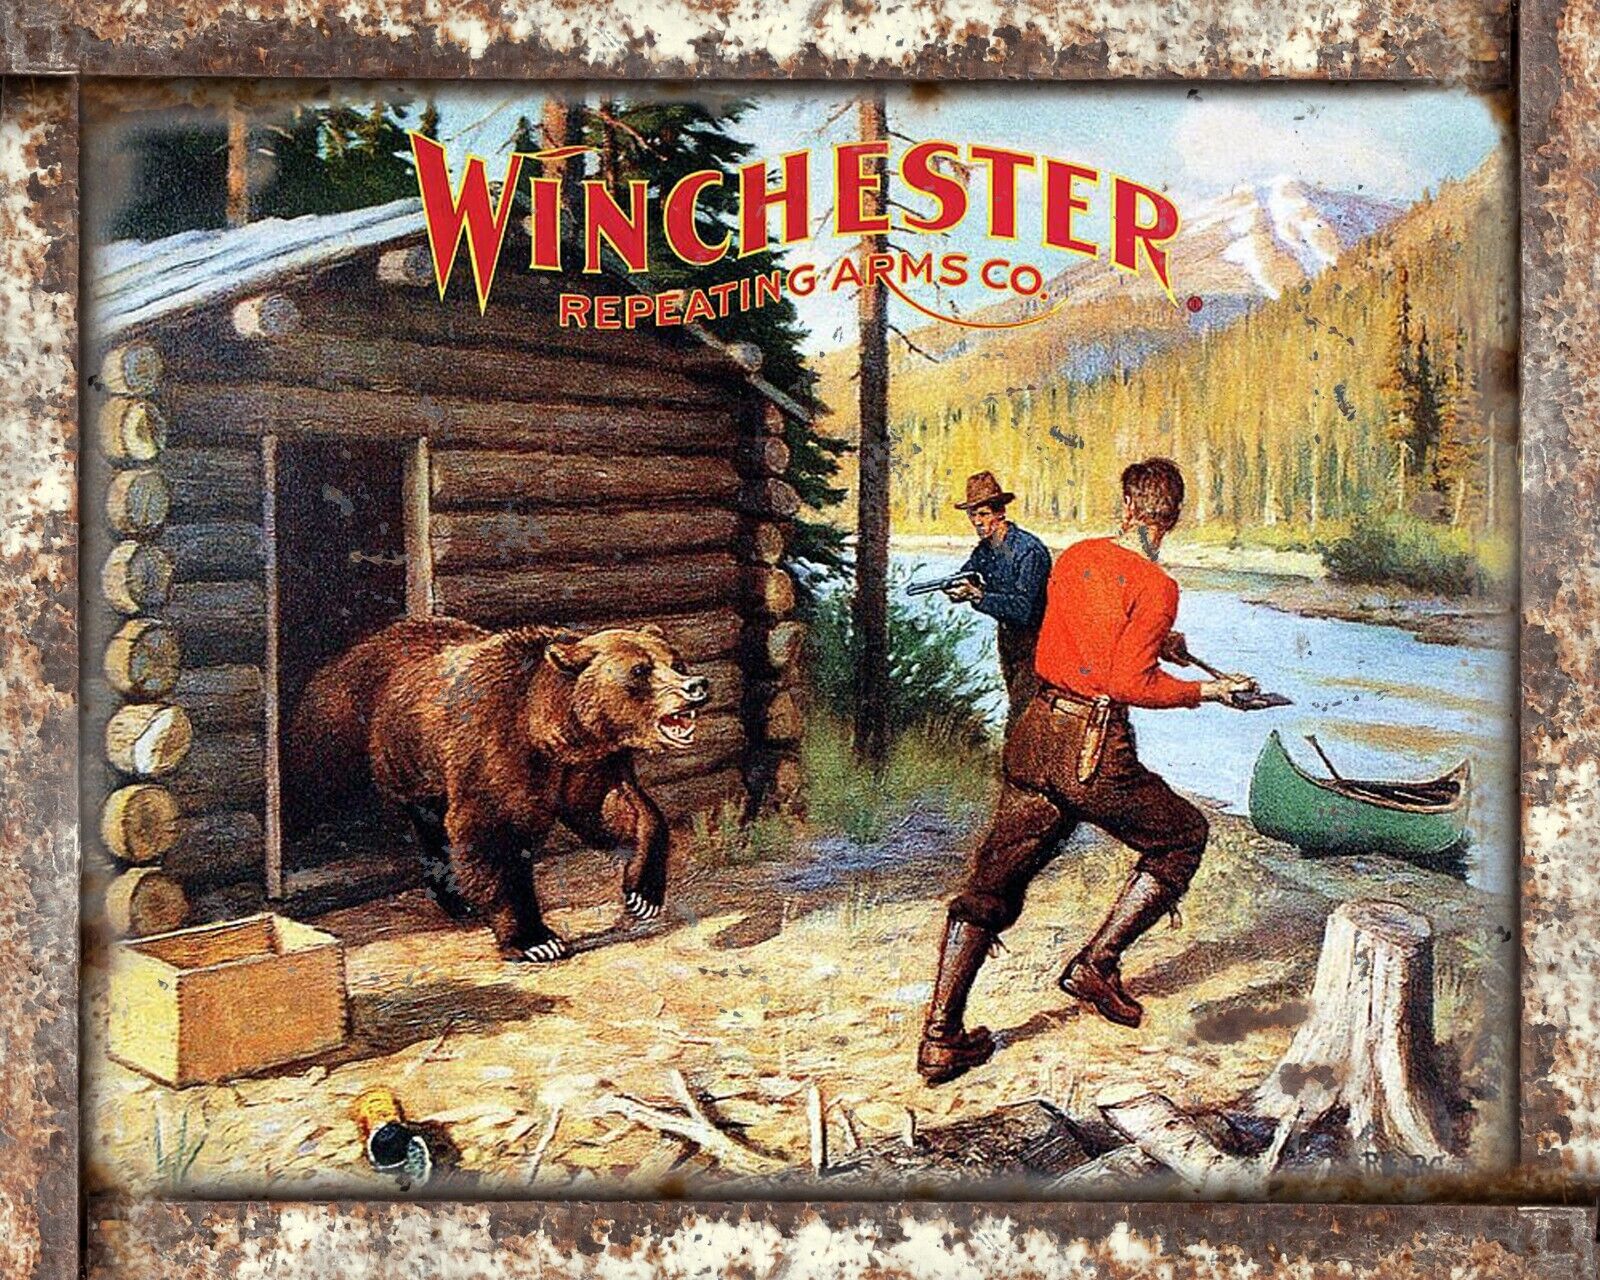 Winchester Hunting Firearms 8x10 Rustic Vintage Style Tin Sign Metal Poster